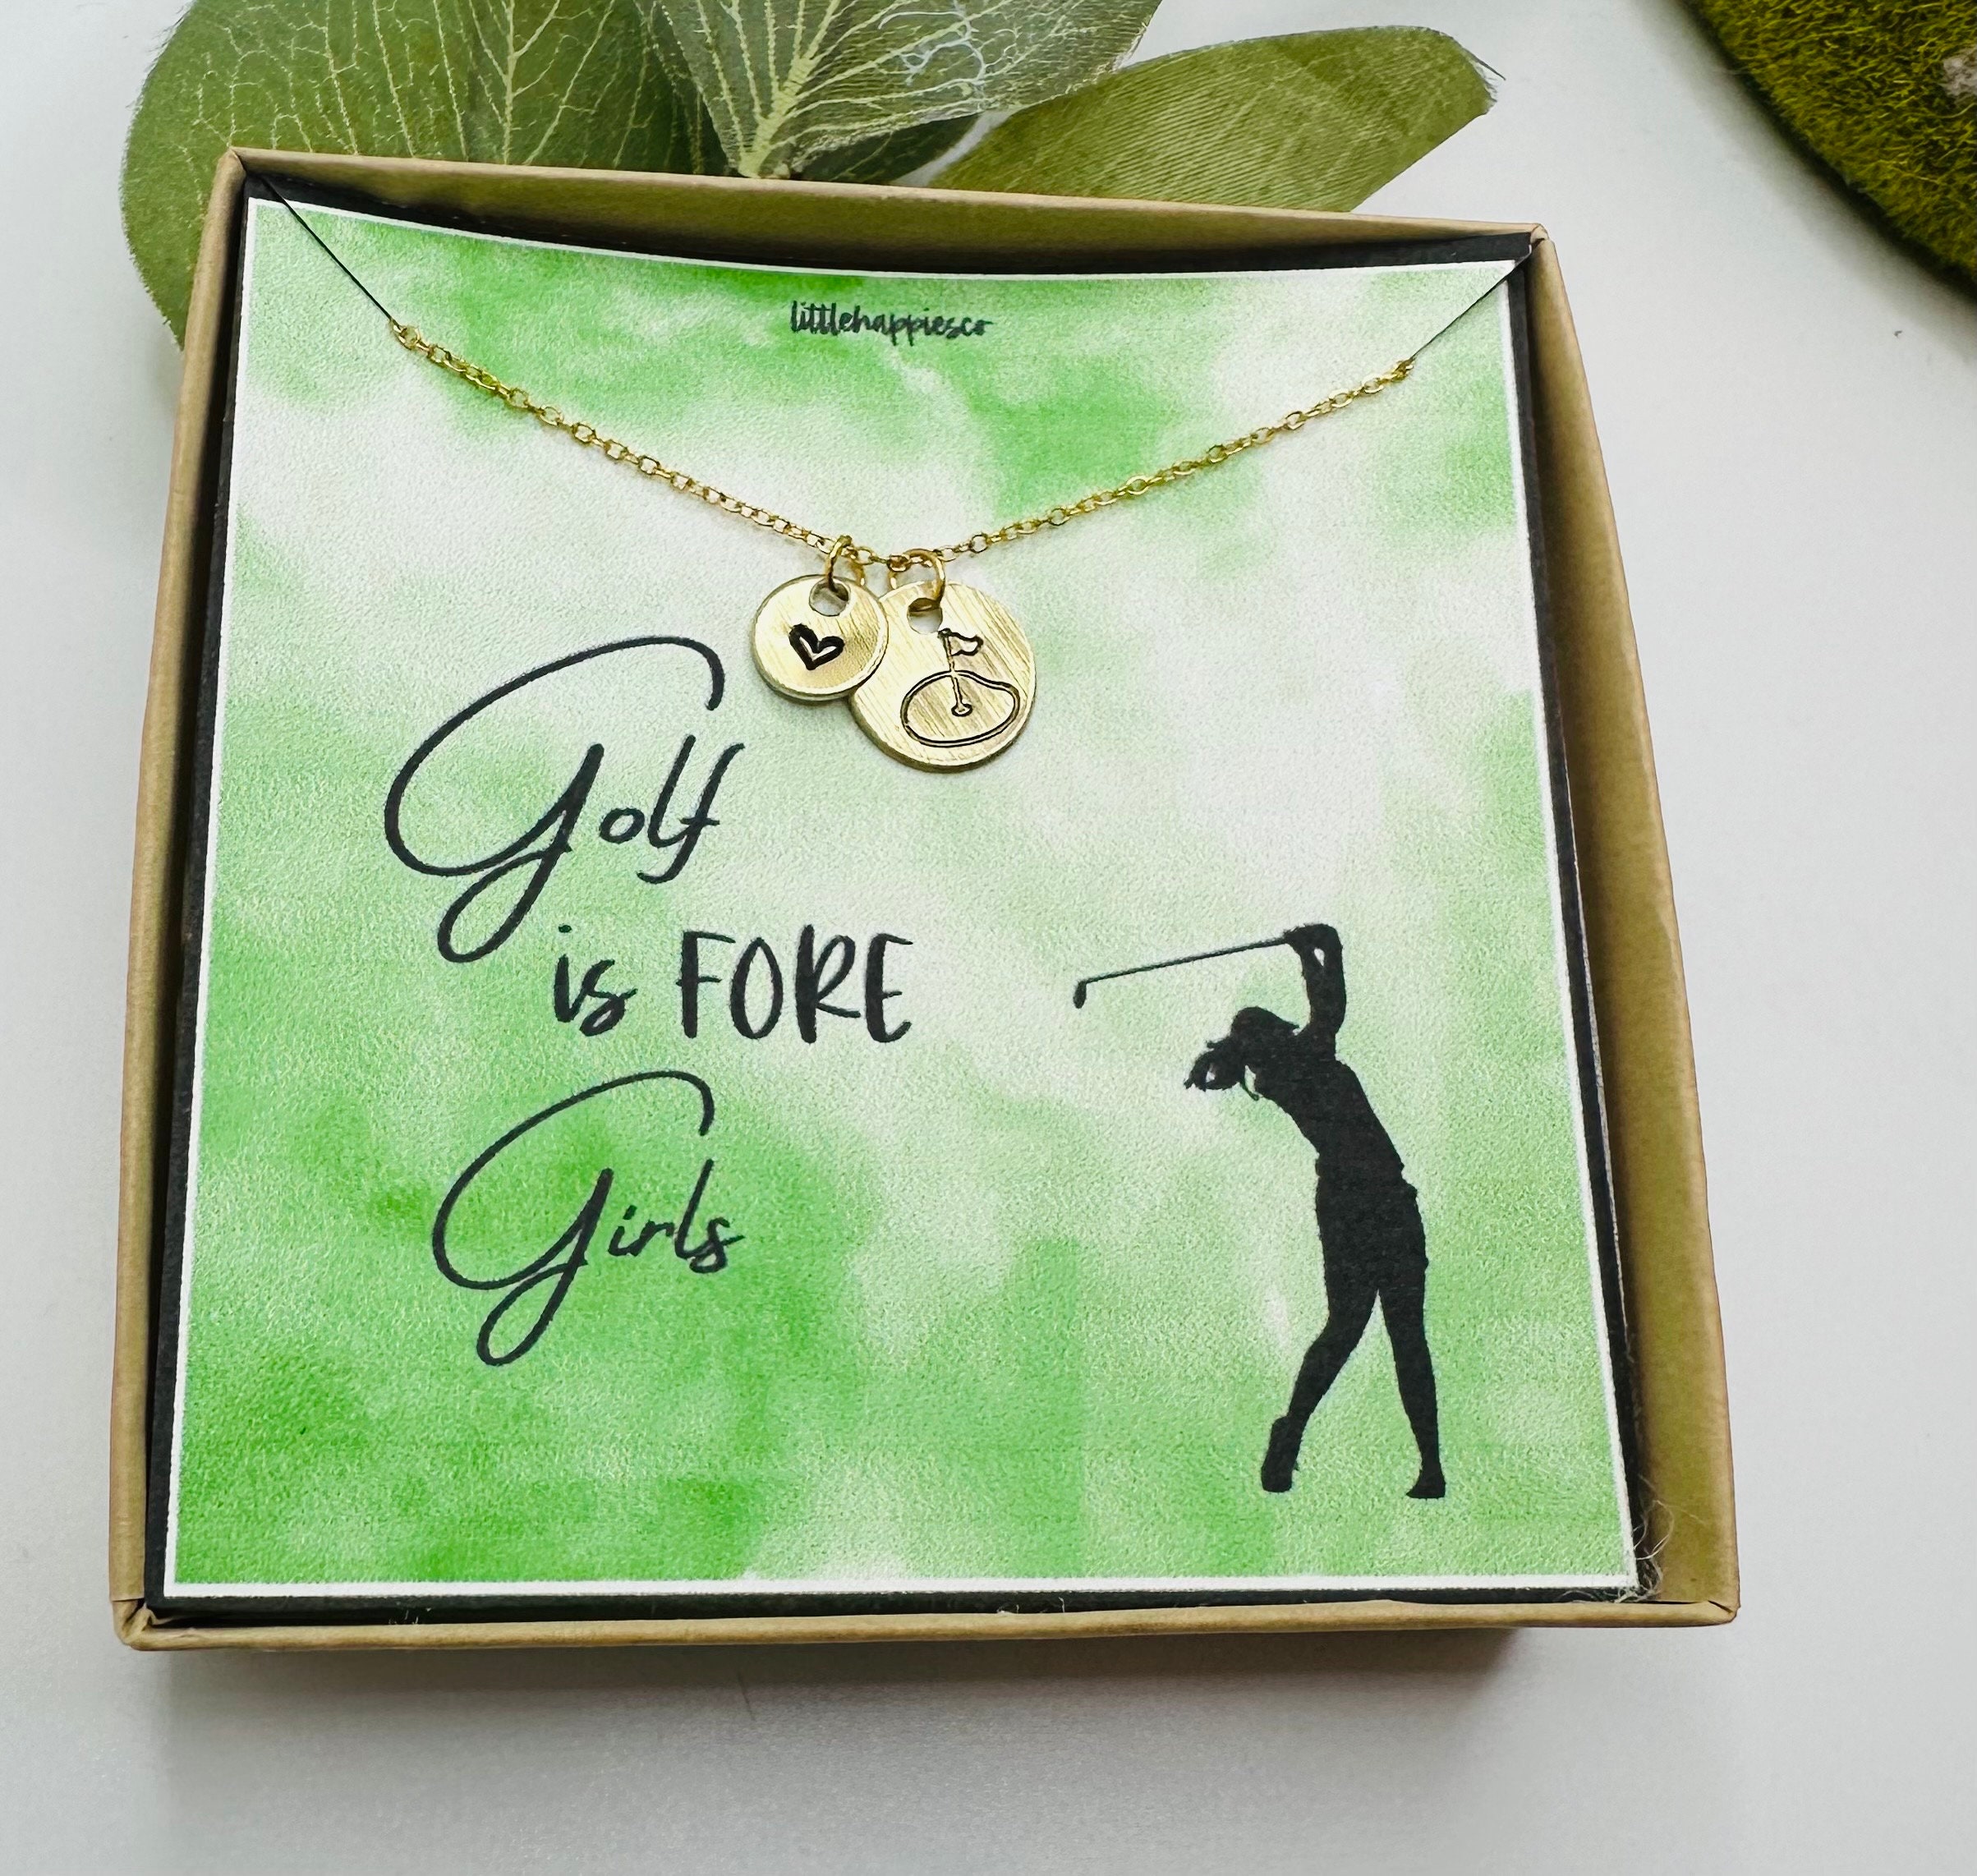 Golf gifts for women Personalised golf gifts For Golf player Woman Gift for  her